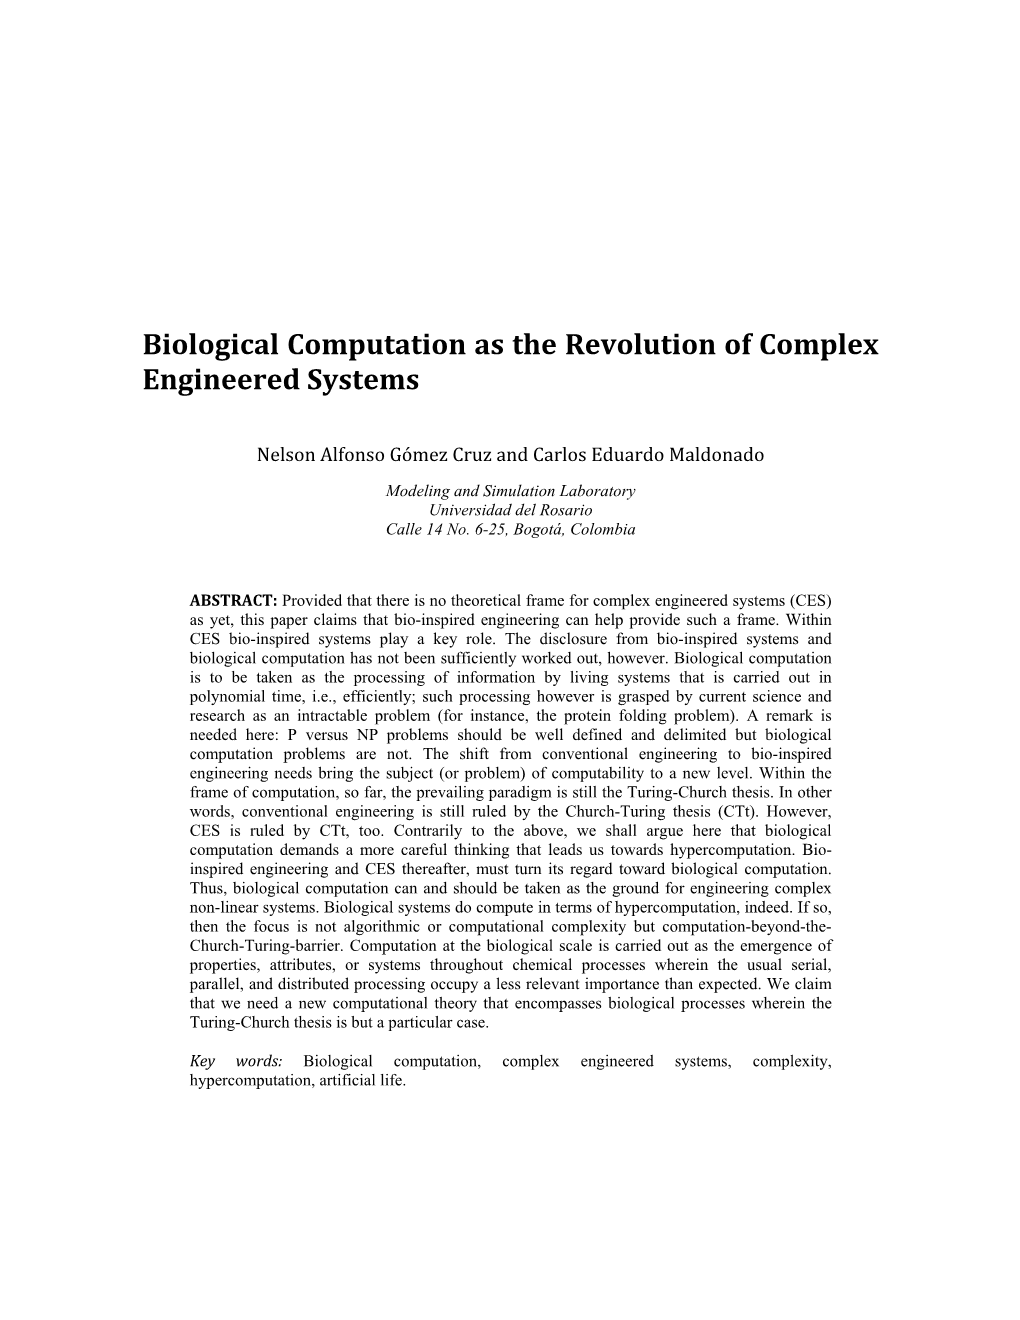 Biological Computation As the Revolution of Complex Engineered Systems